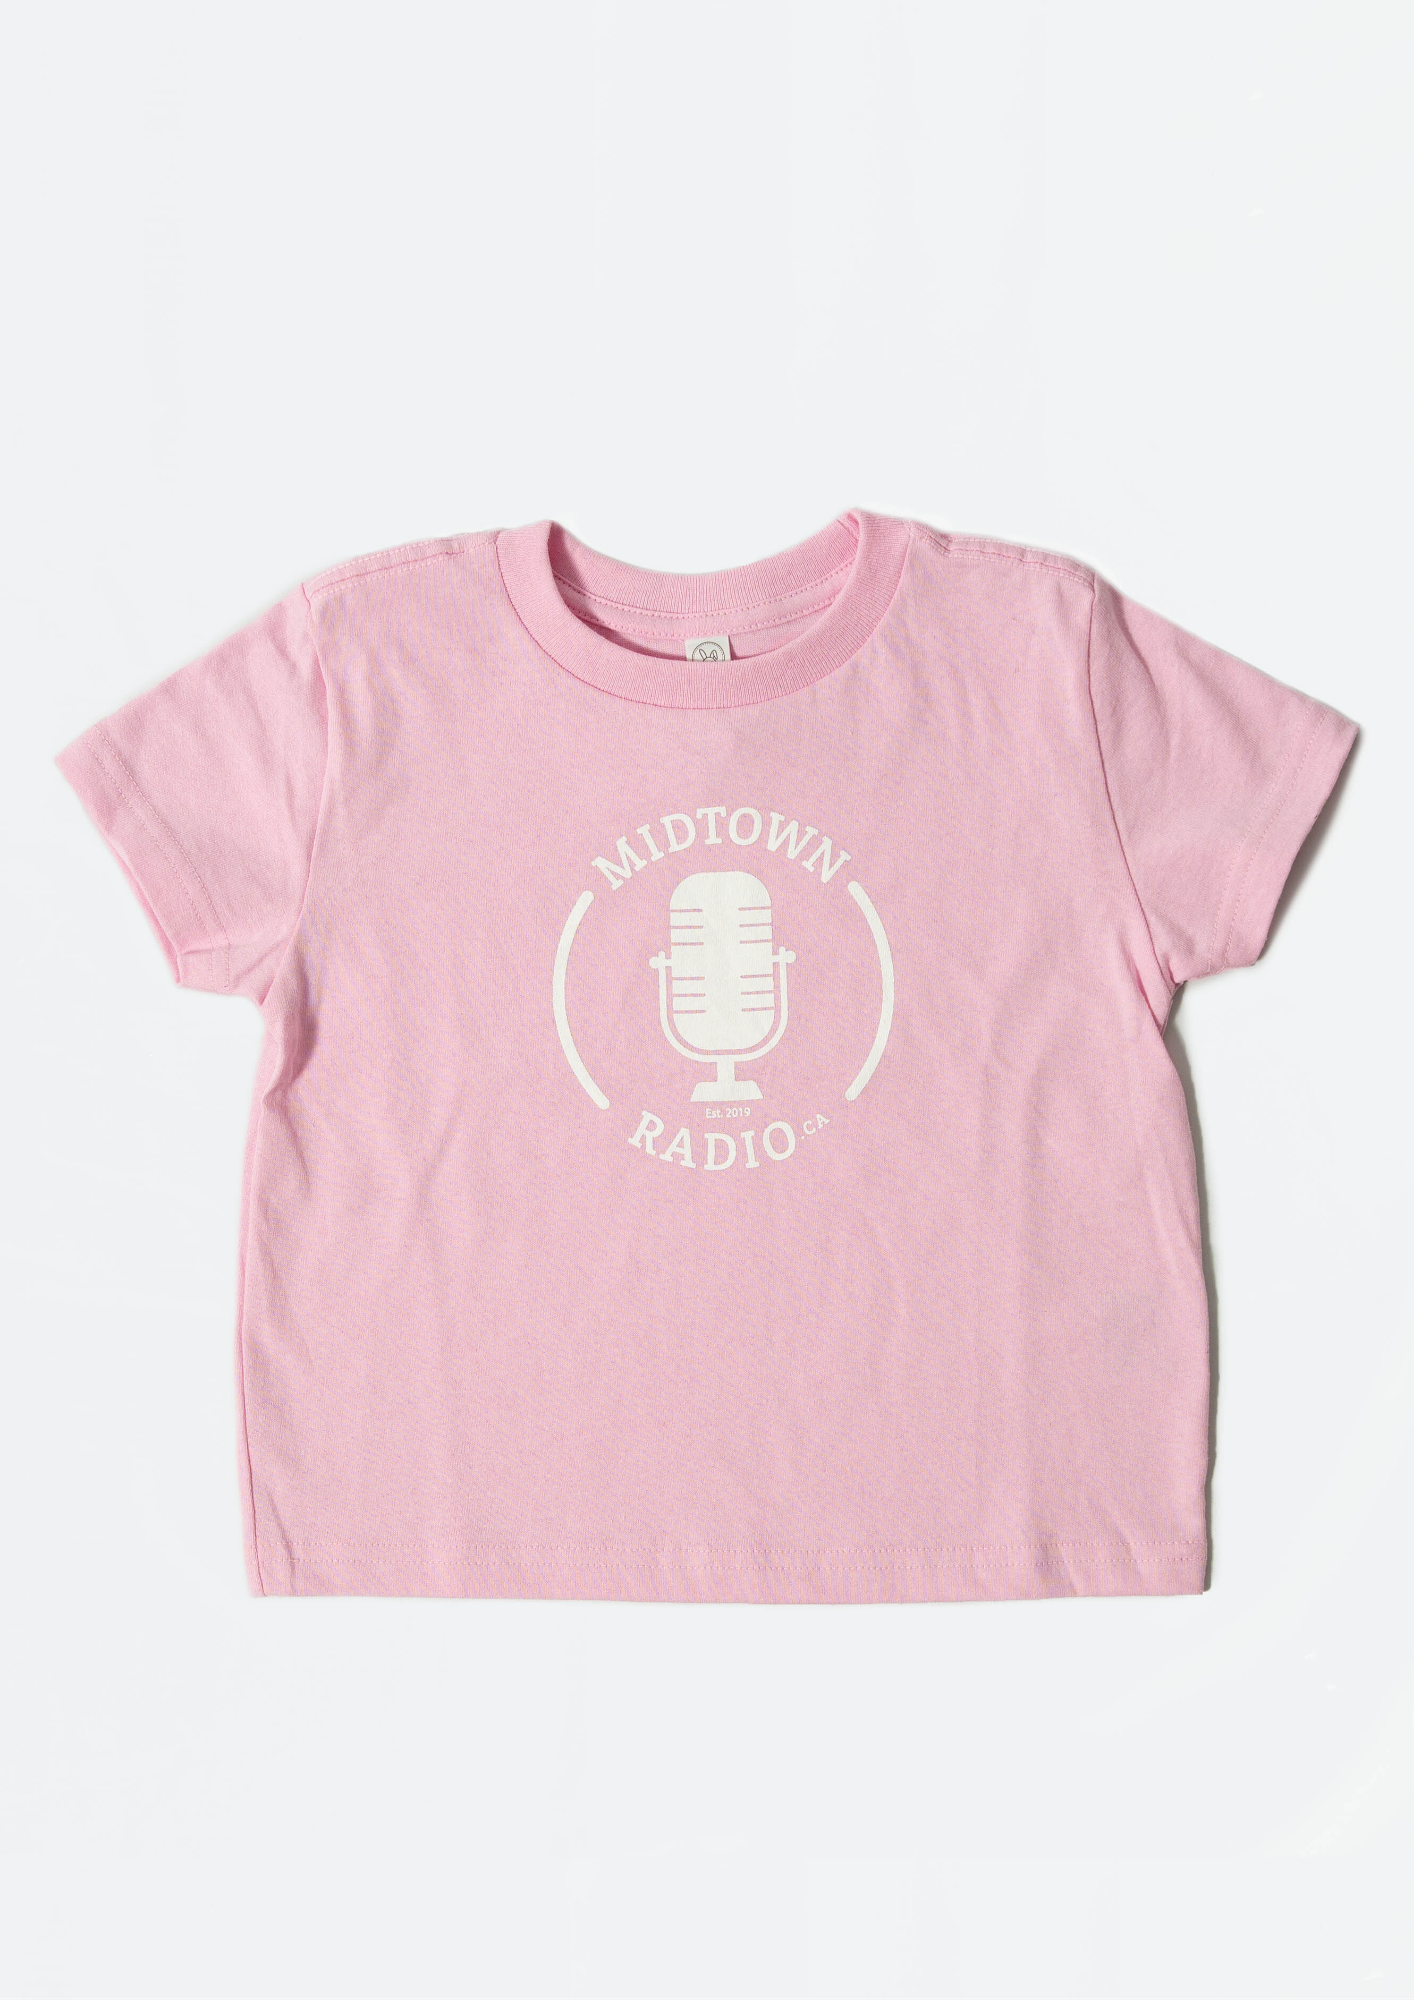 pink children's t-shirt 'midtown radio'  with white microphone graphic